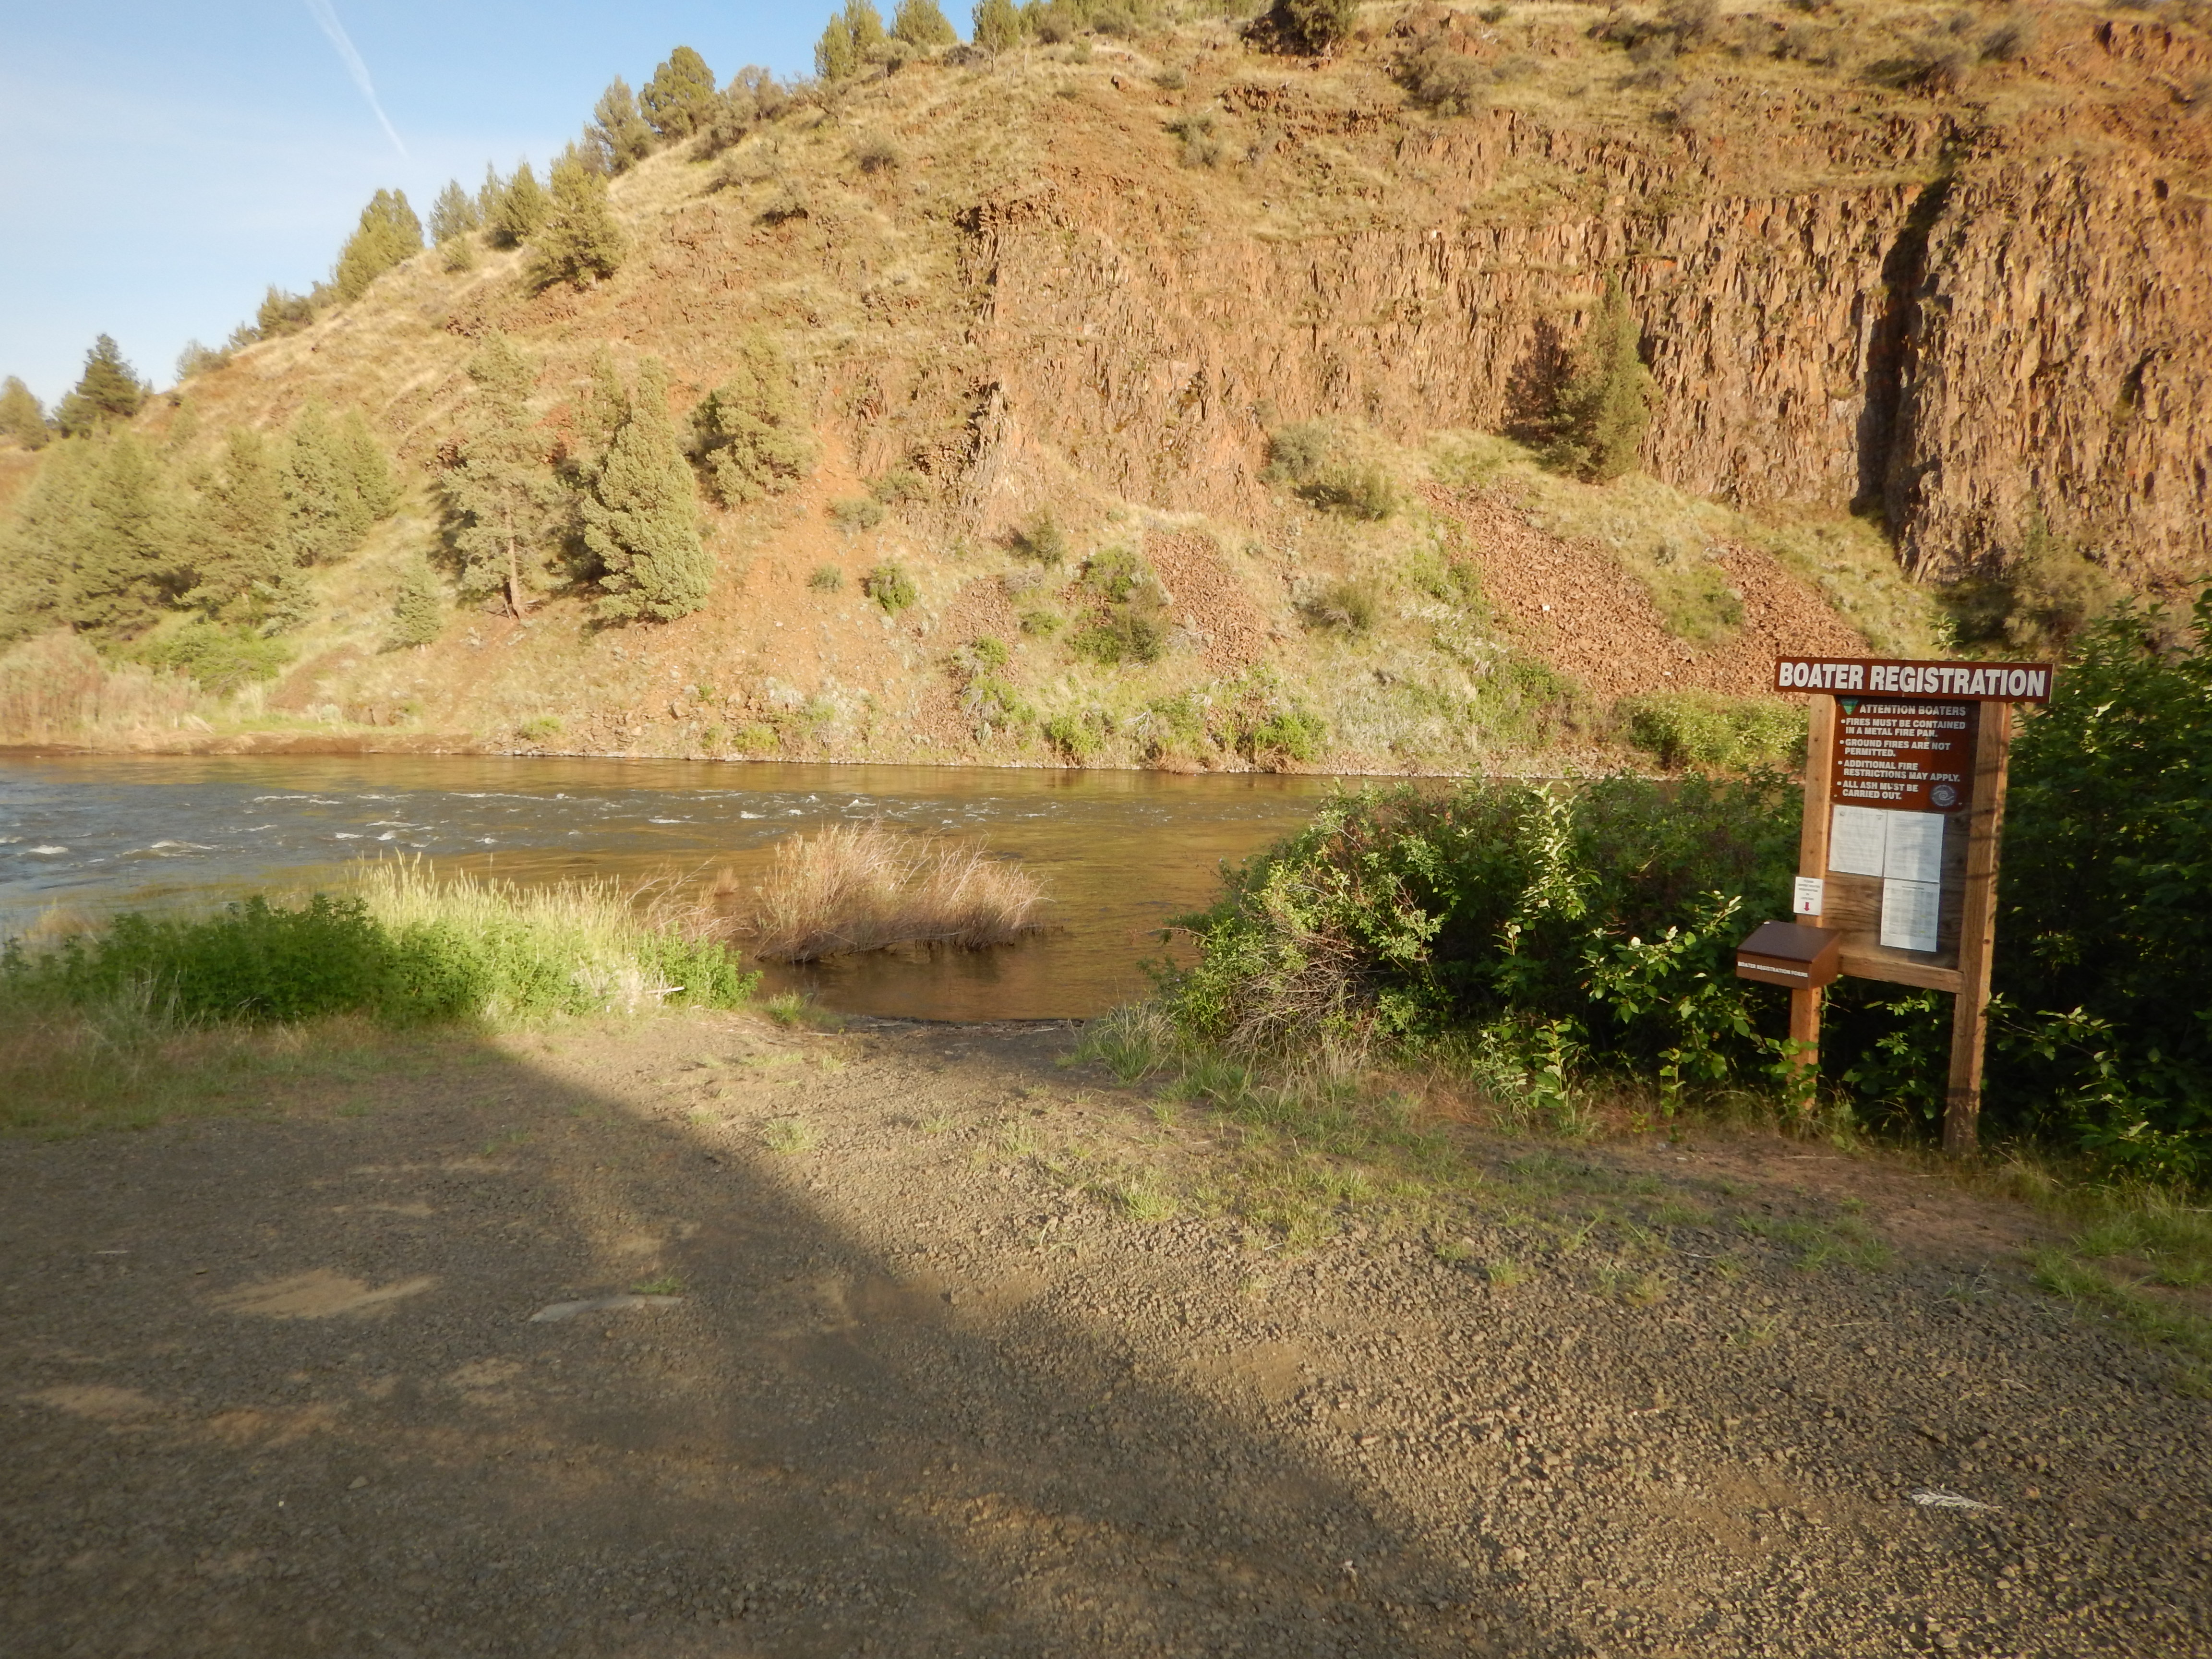 Primitive boat launch at Muleshoe Campground